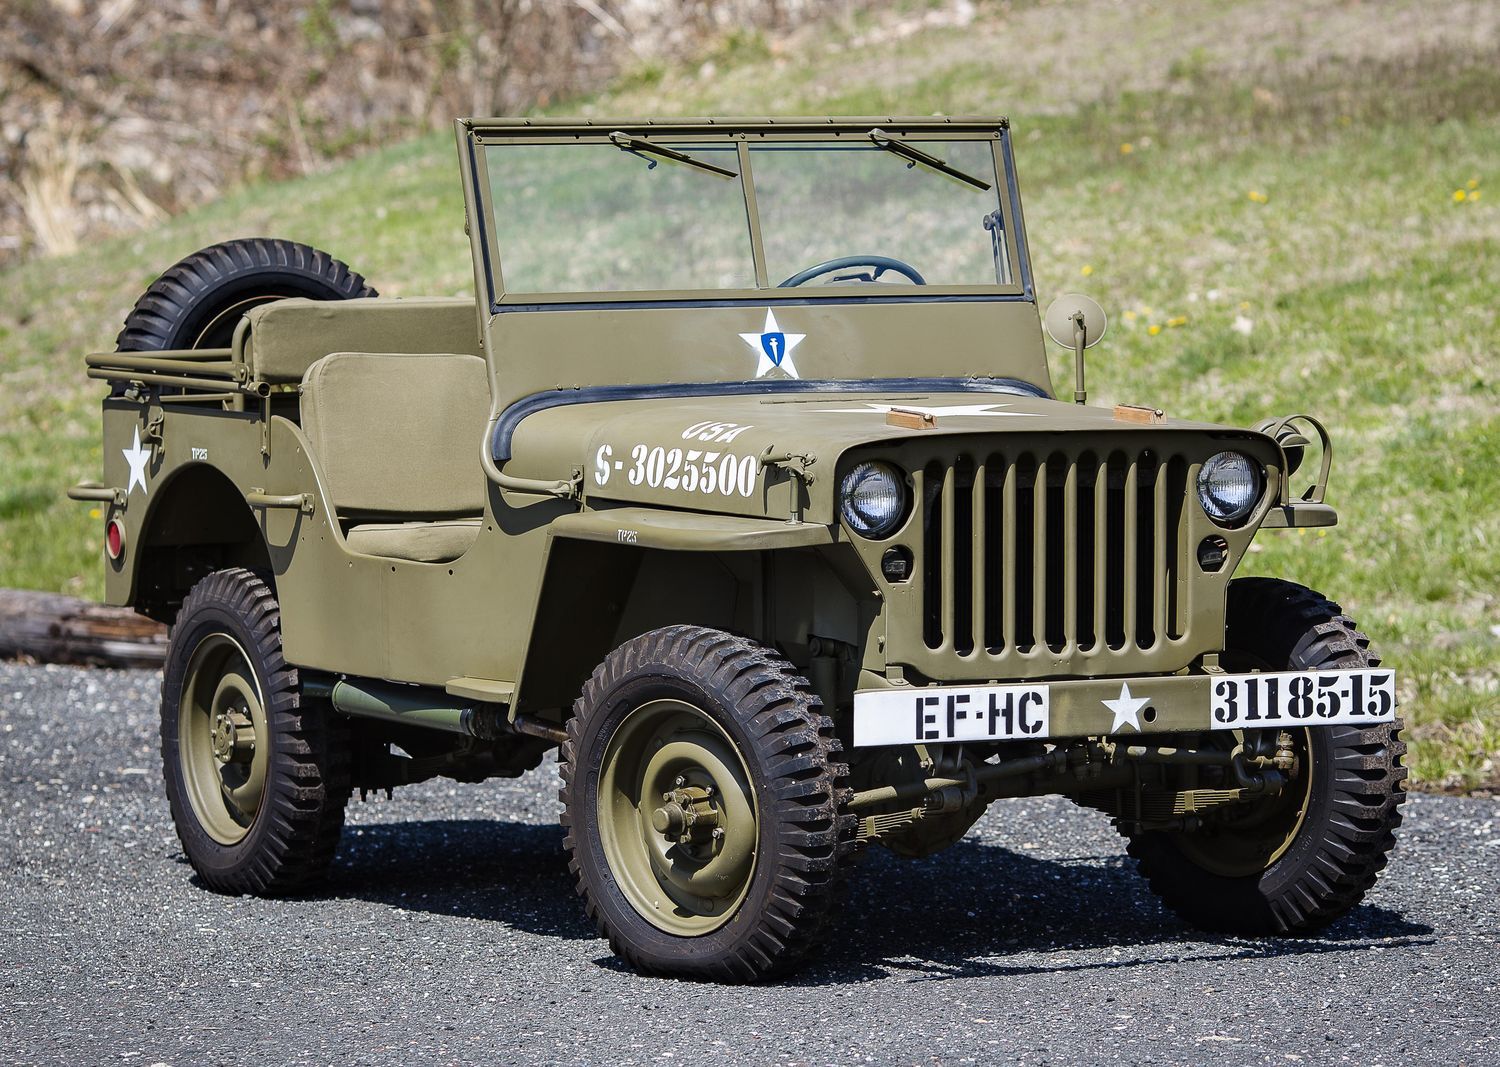 Willys Jeep wallpaper, Vehicles, HQ Willys Jeep pictureK Wallpaper 2019